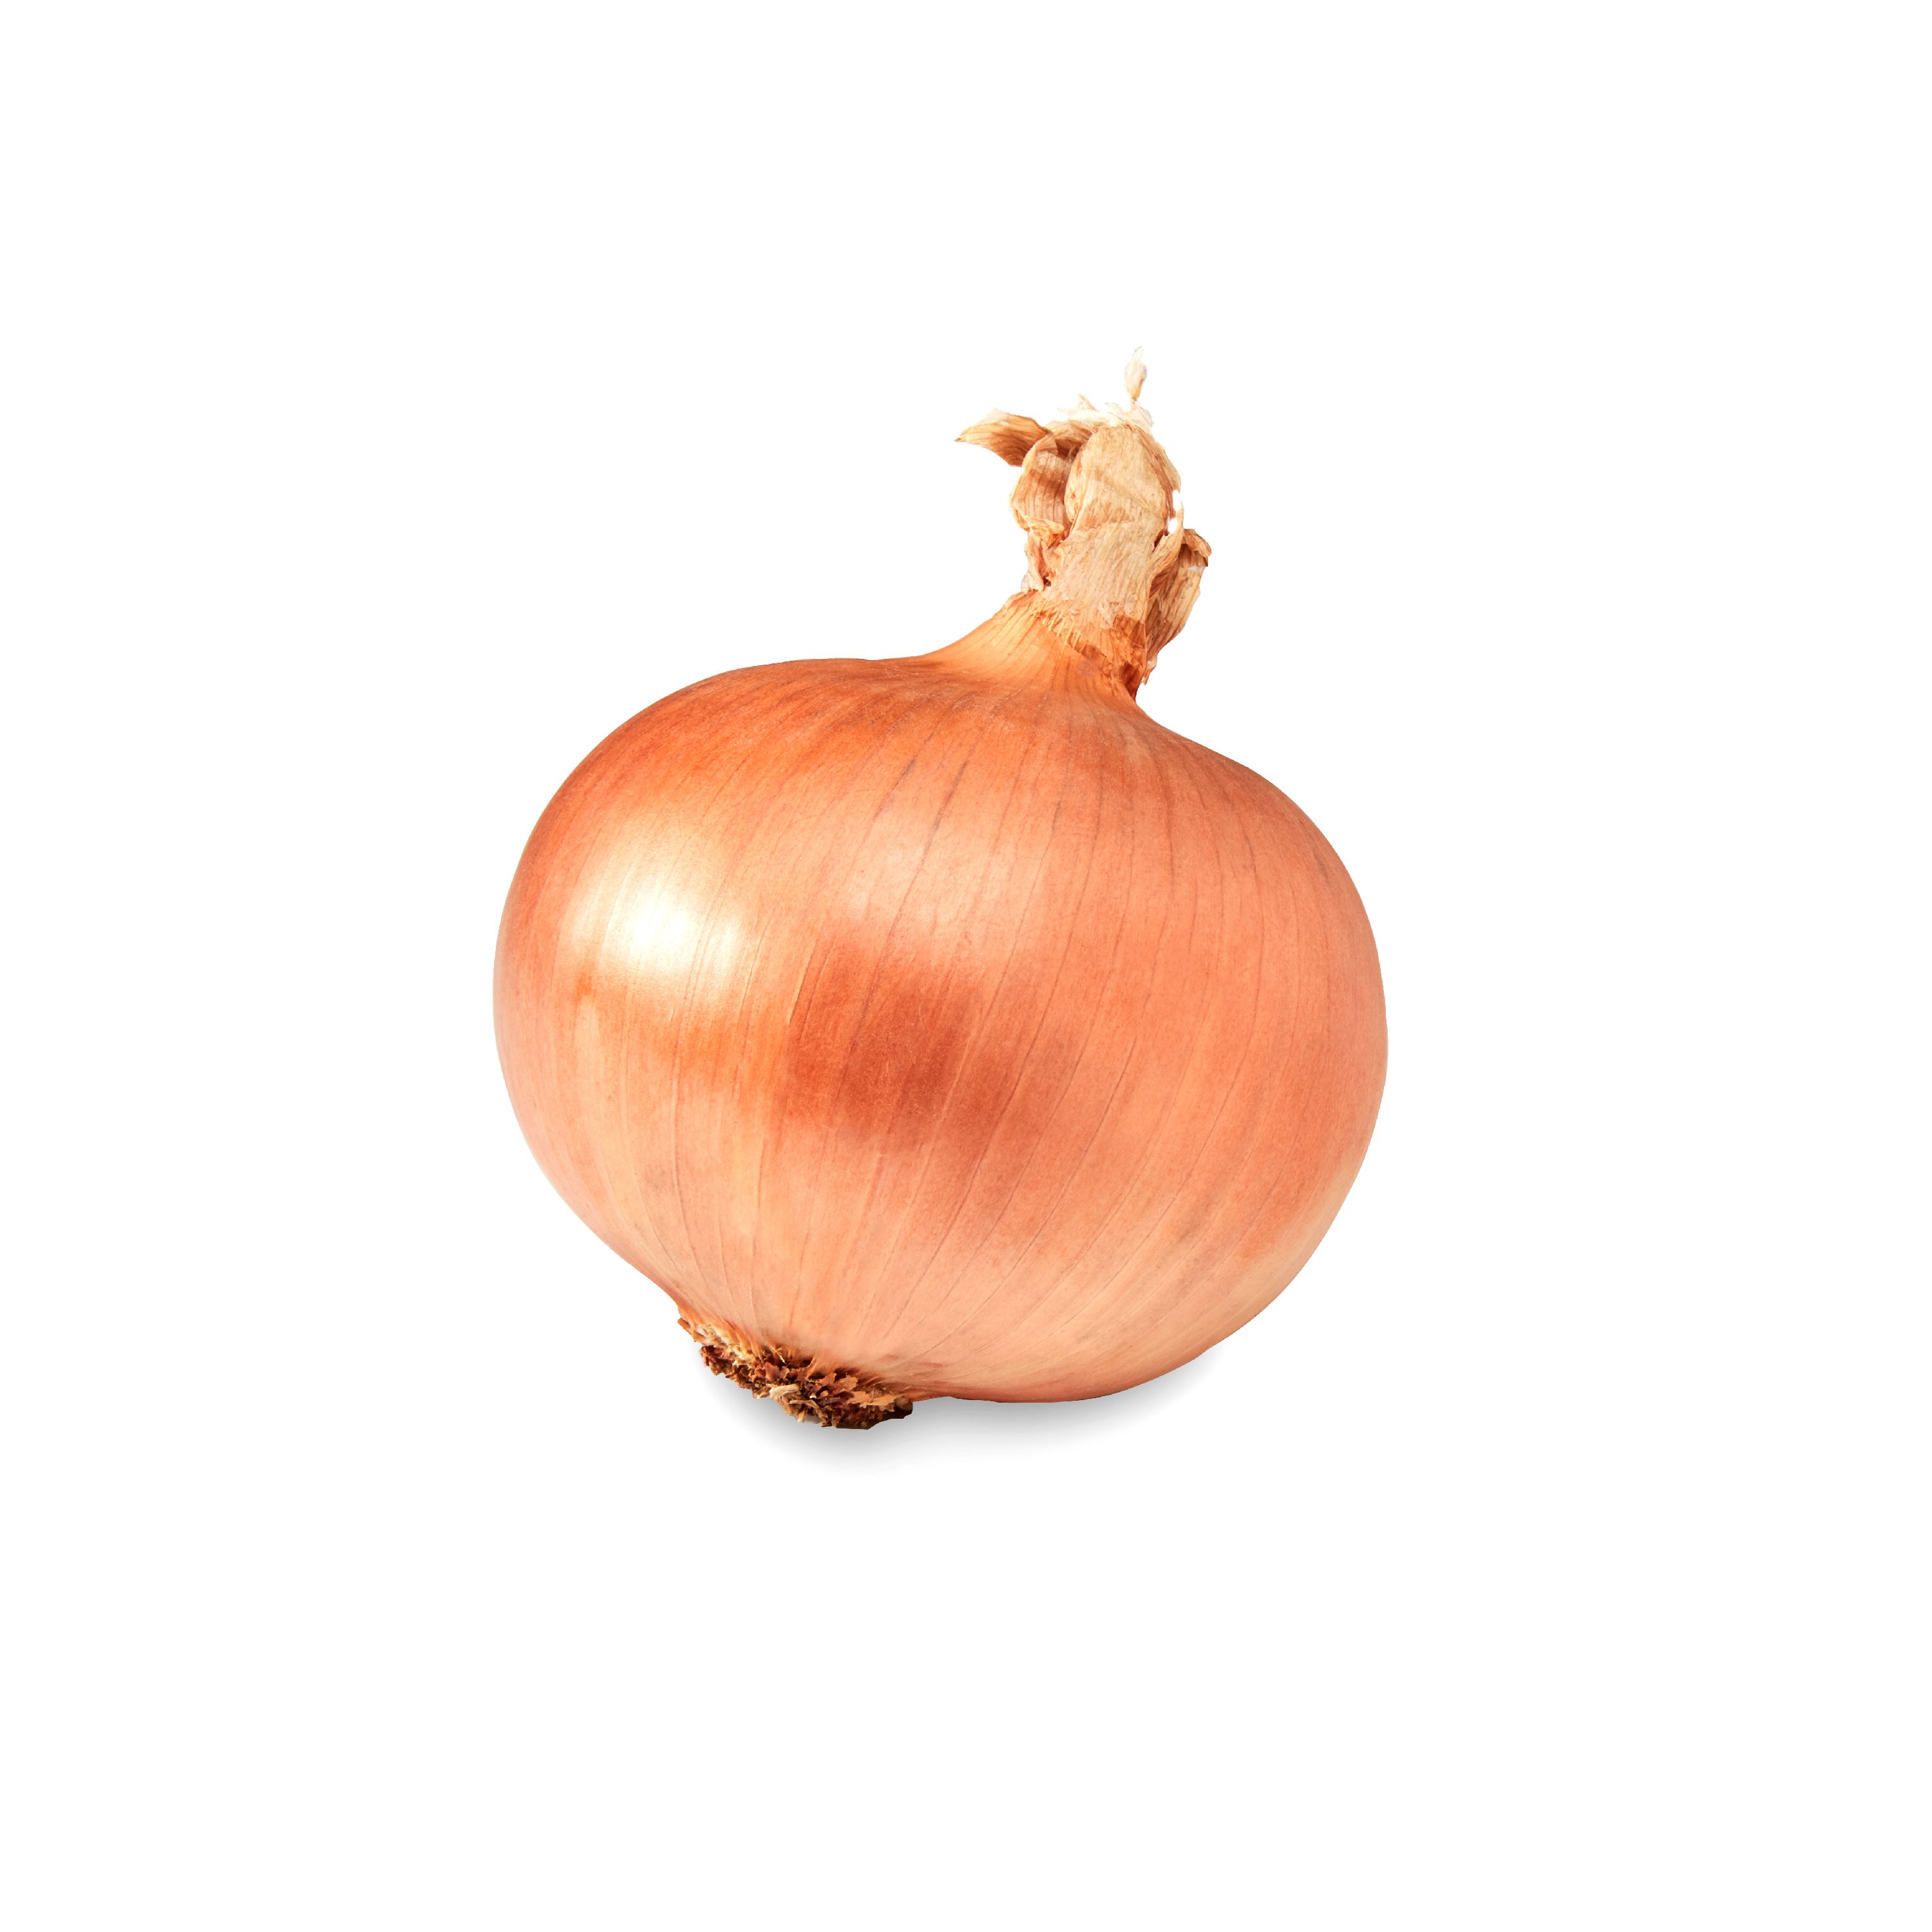 Picture Of An Onion